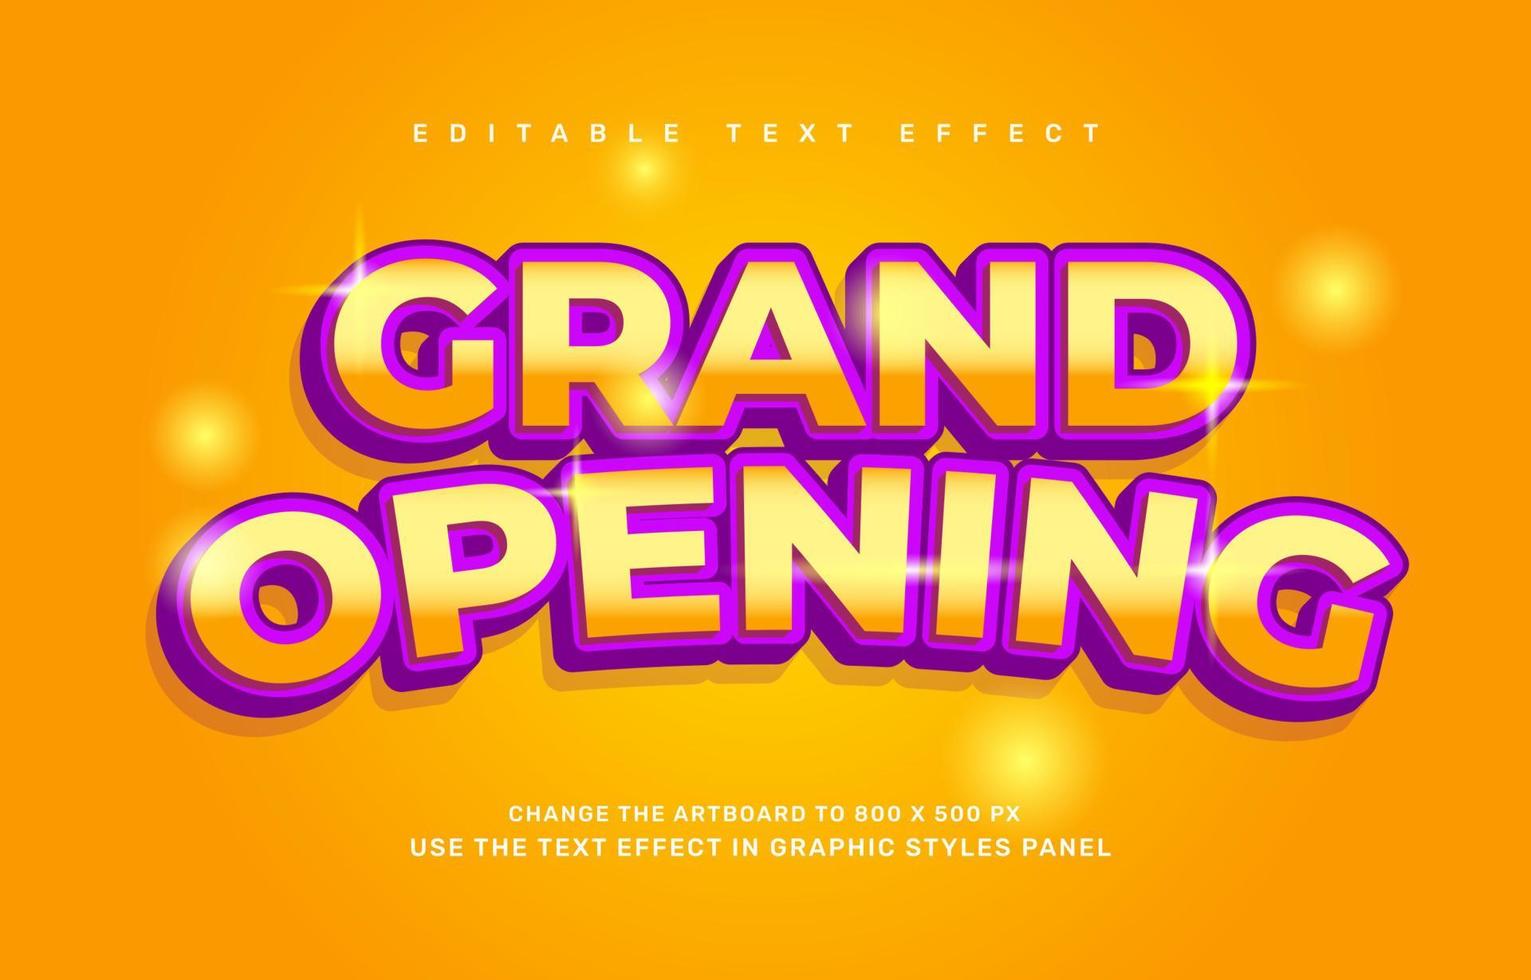 Grand Opening text effect vector